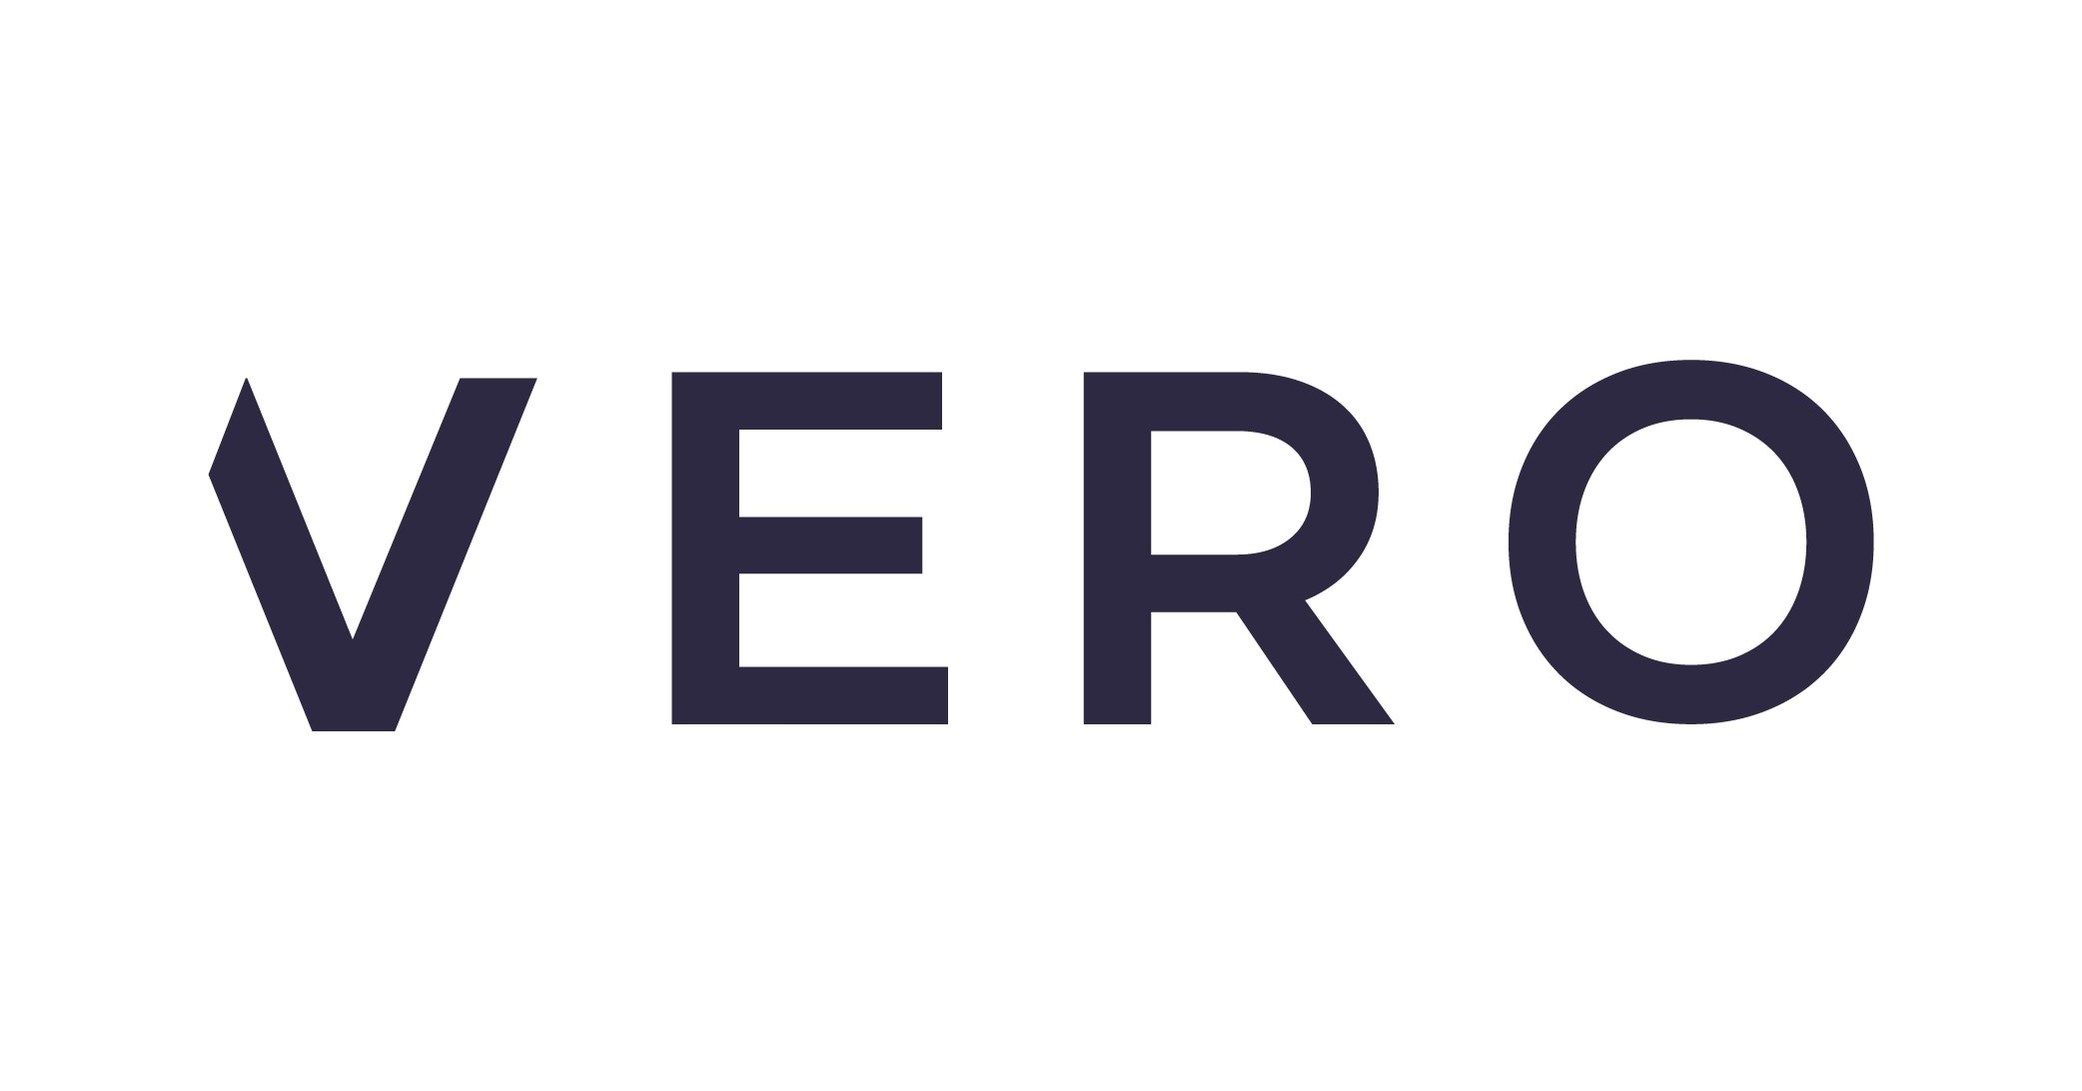 VERO, The Modern Leasing Platform For Owners And Renters, Announces $9M  Series B Funding Round Led By Fifth Wall